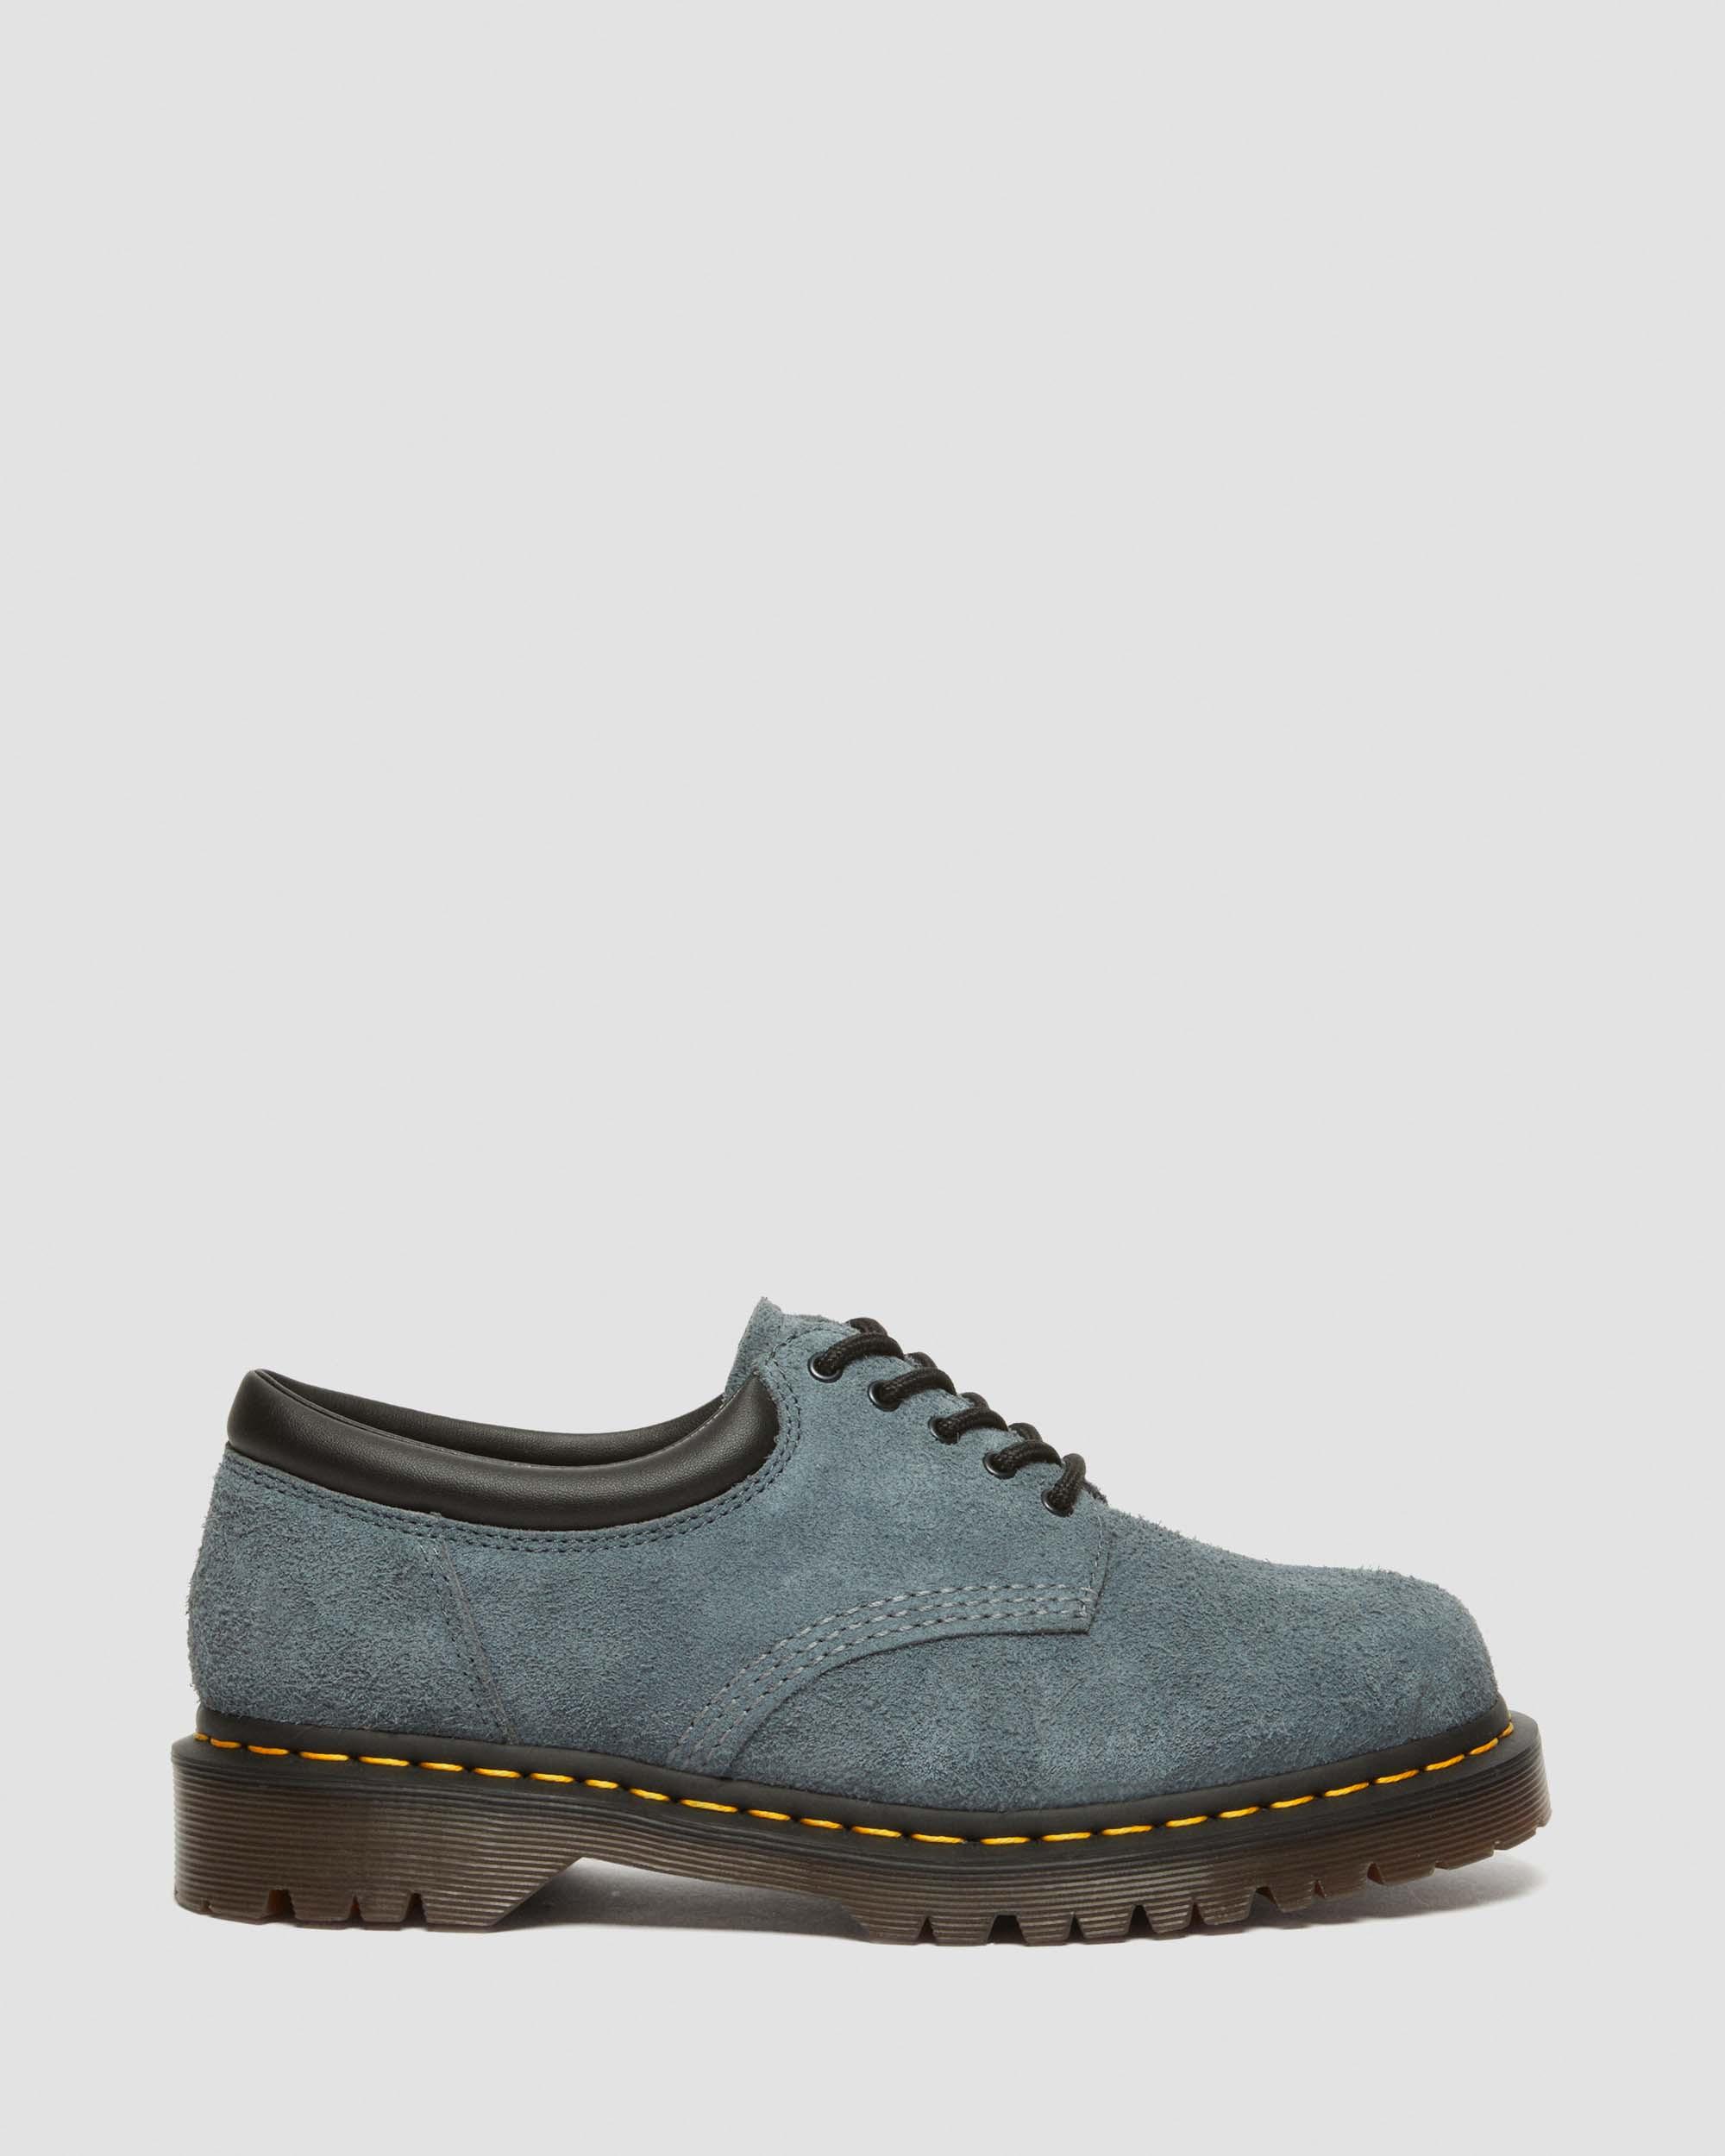 8053 Ben Suede Shoes in Washed Denim